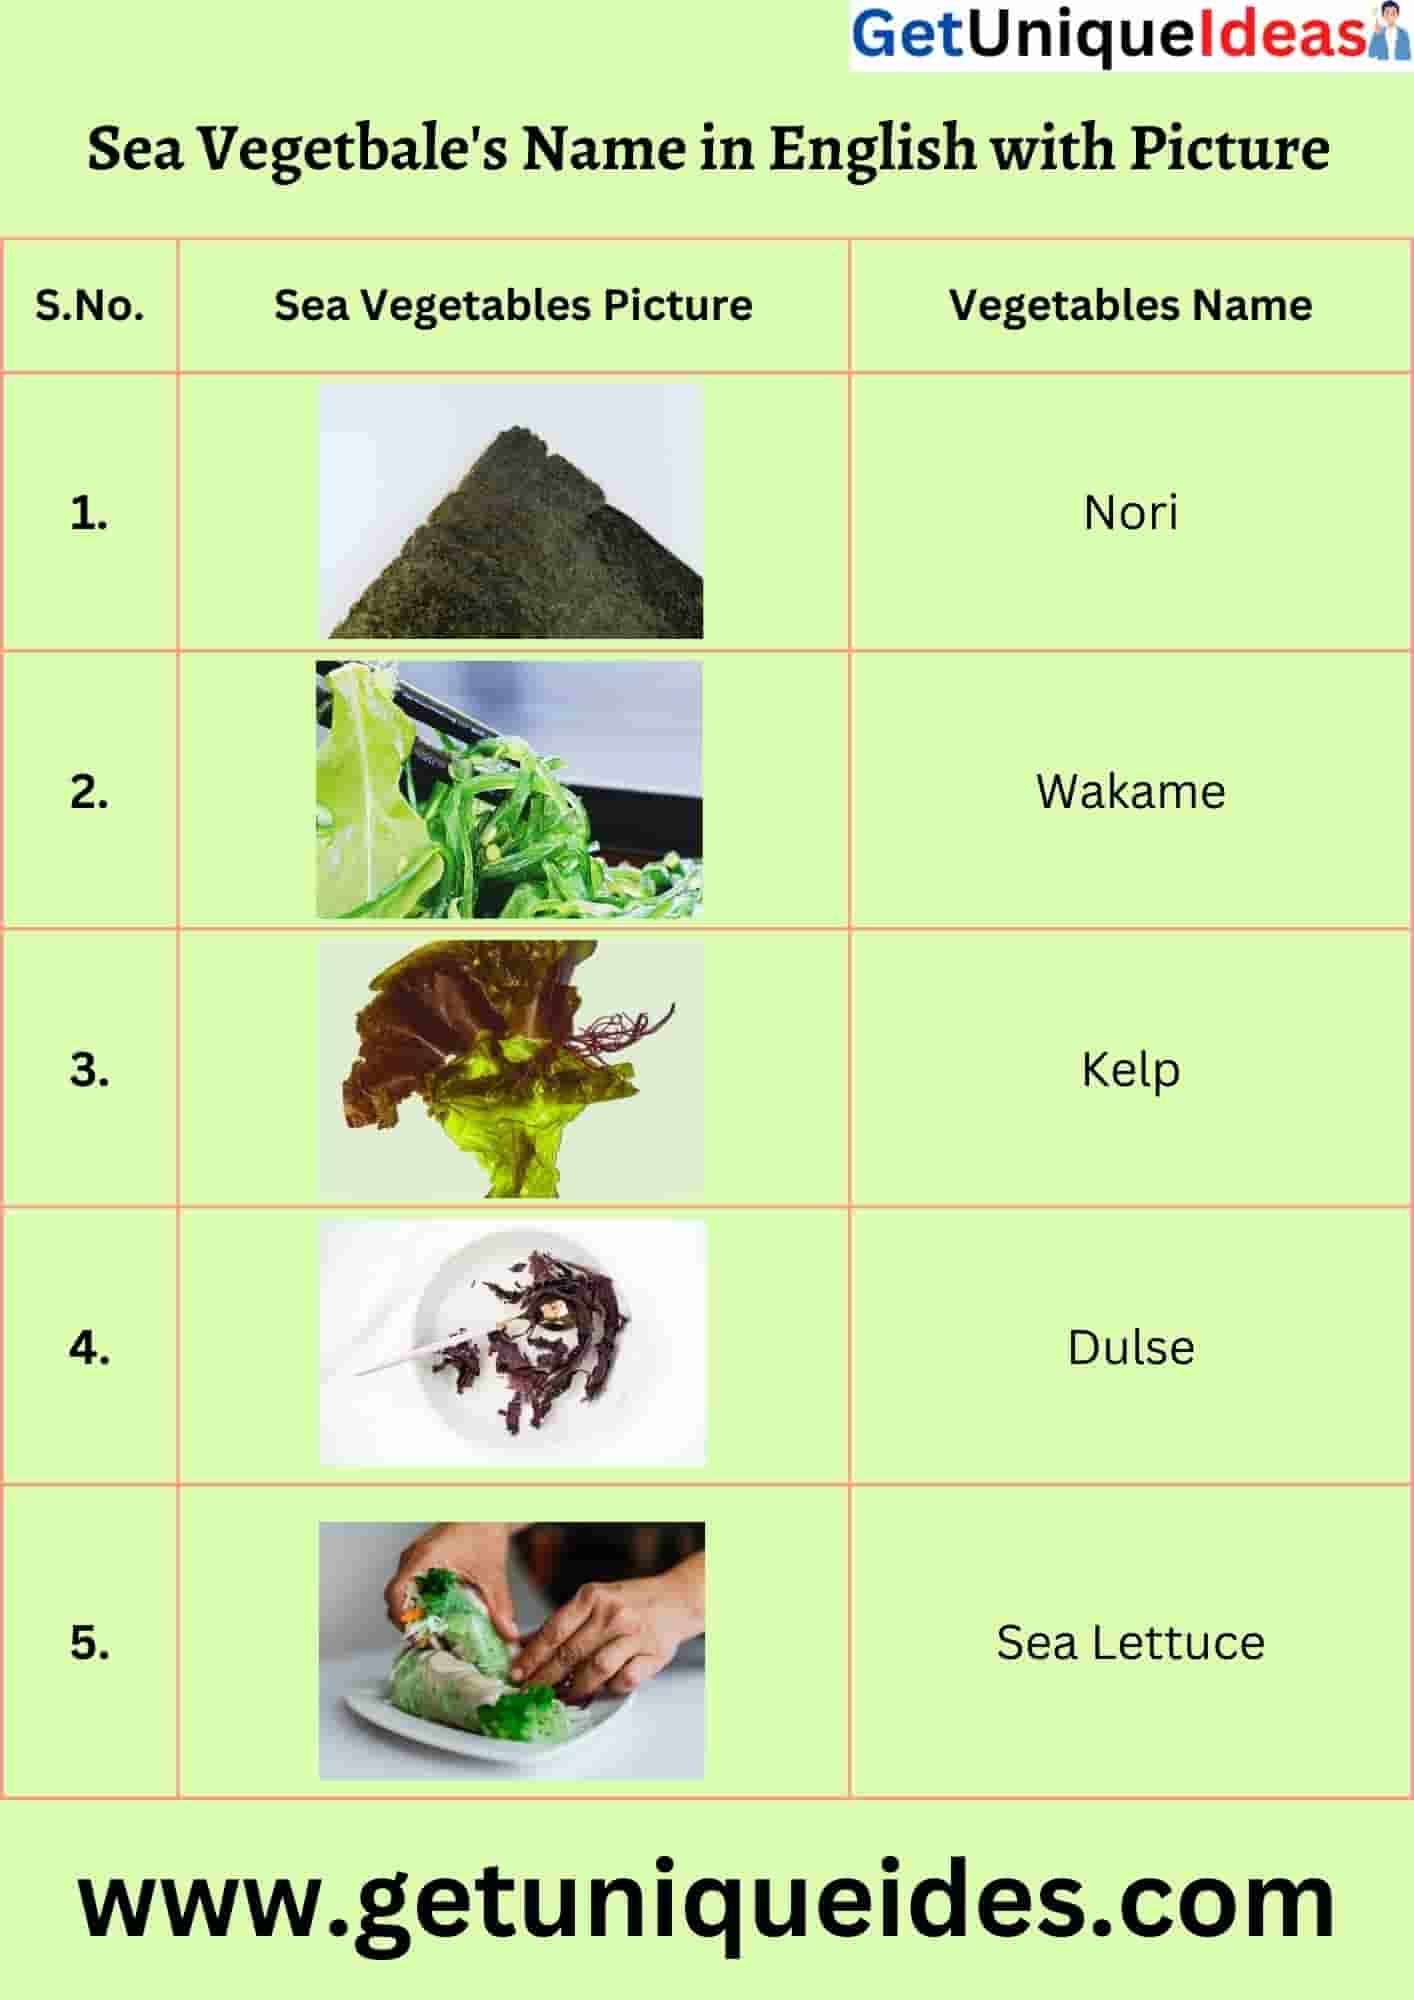 Sea Vegetable's Name in English with Picture